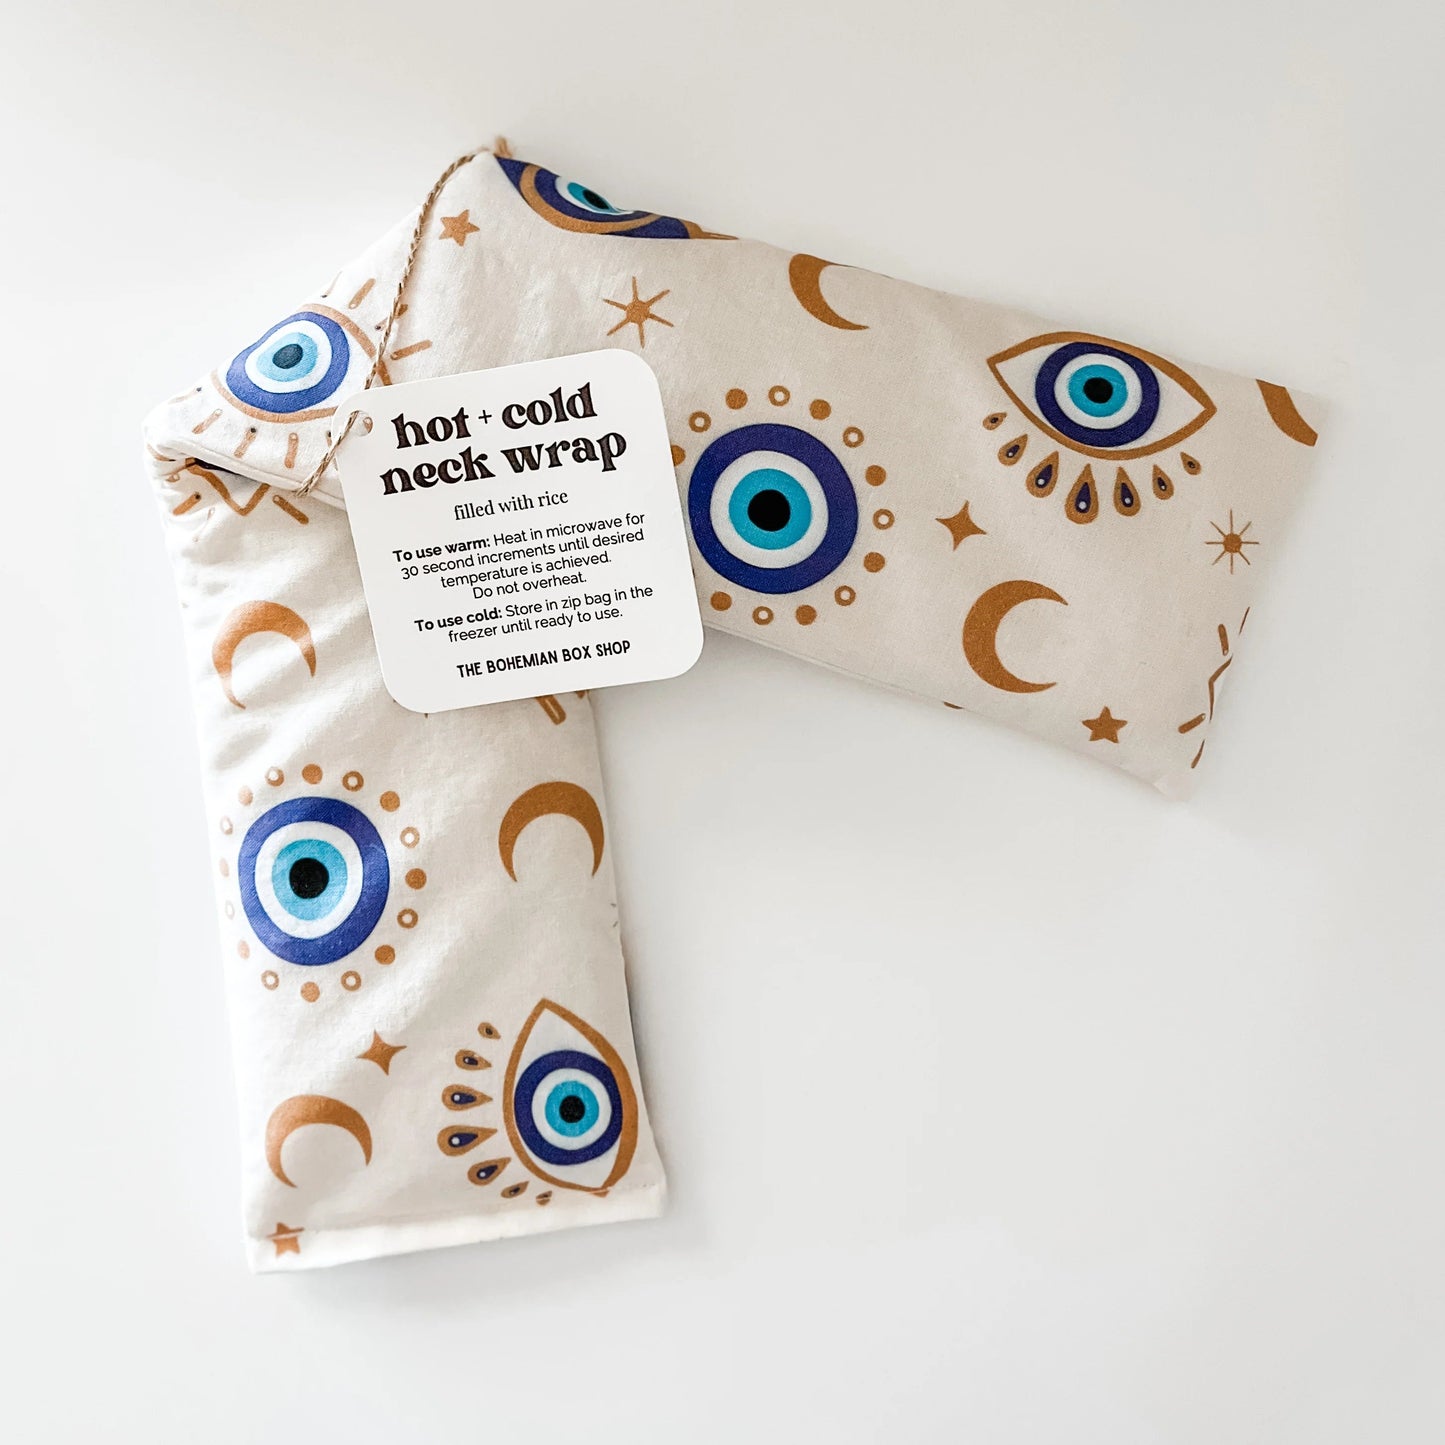 Blue and Gold Evil Eye Hot and Cold Neck Wrap - Microwaveable Rice Packs